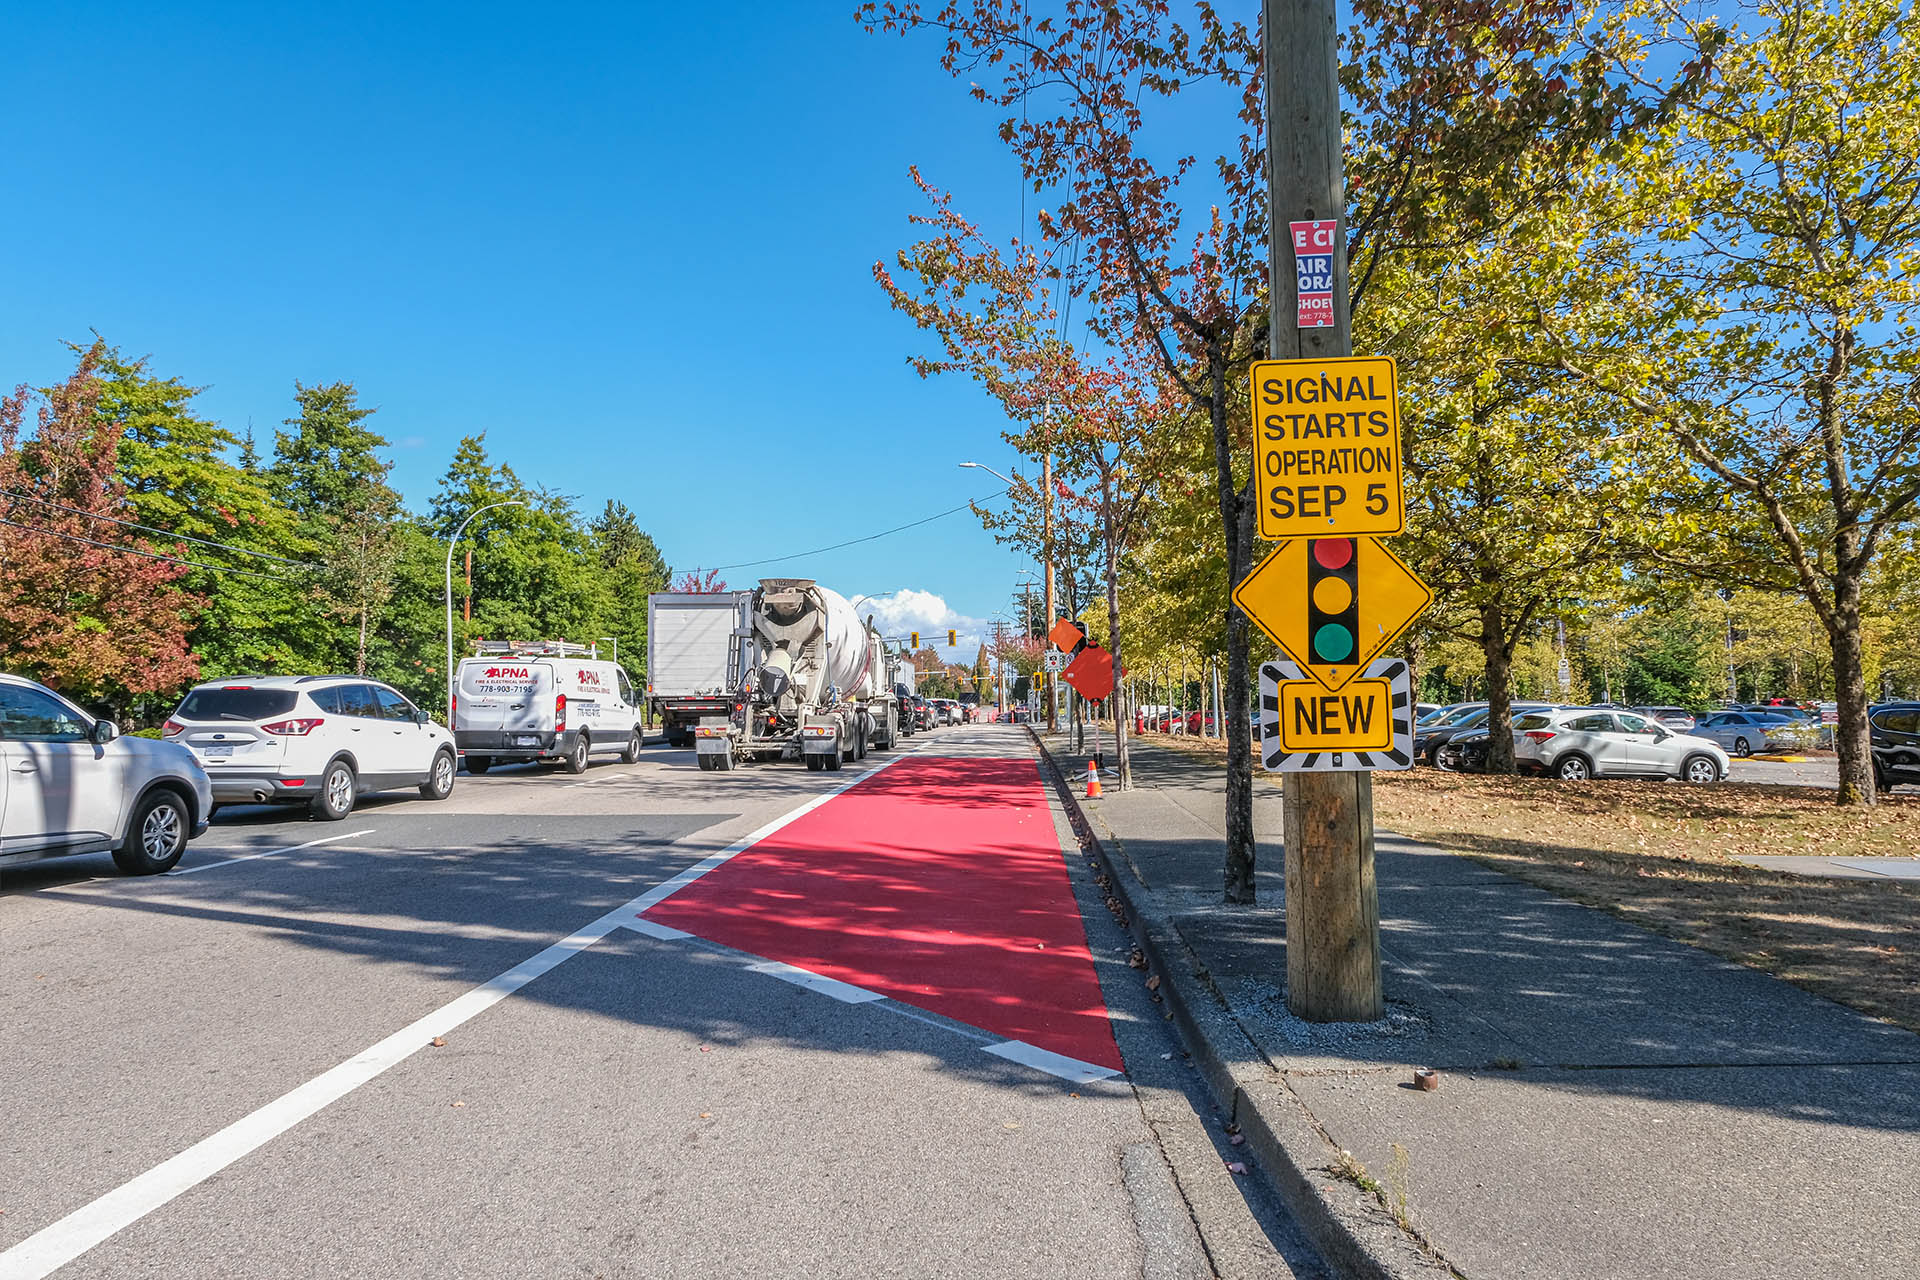 A bus priority lane by Kwantlen Polytechnic University (KPU) in Surrey